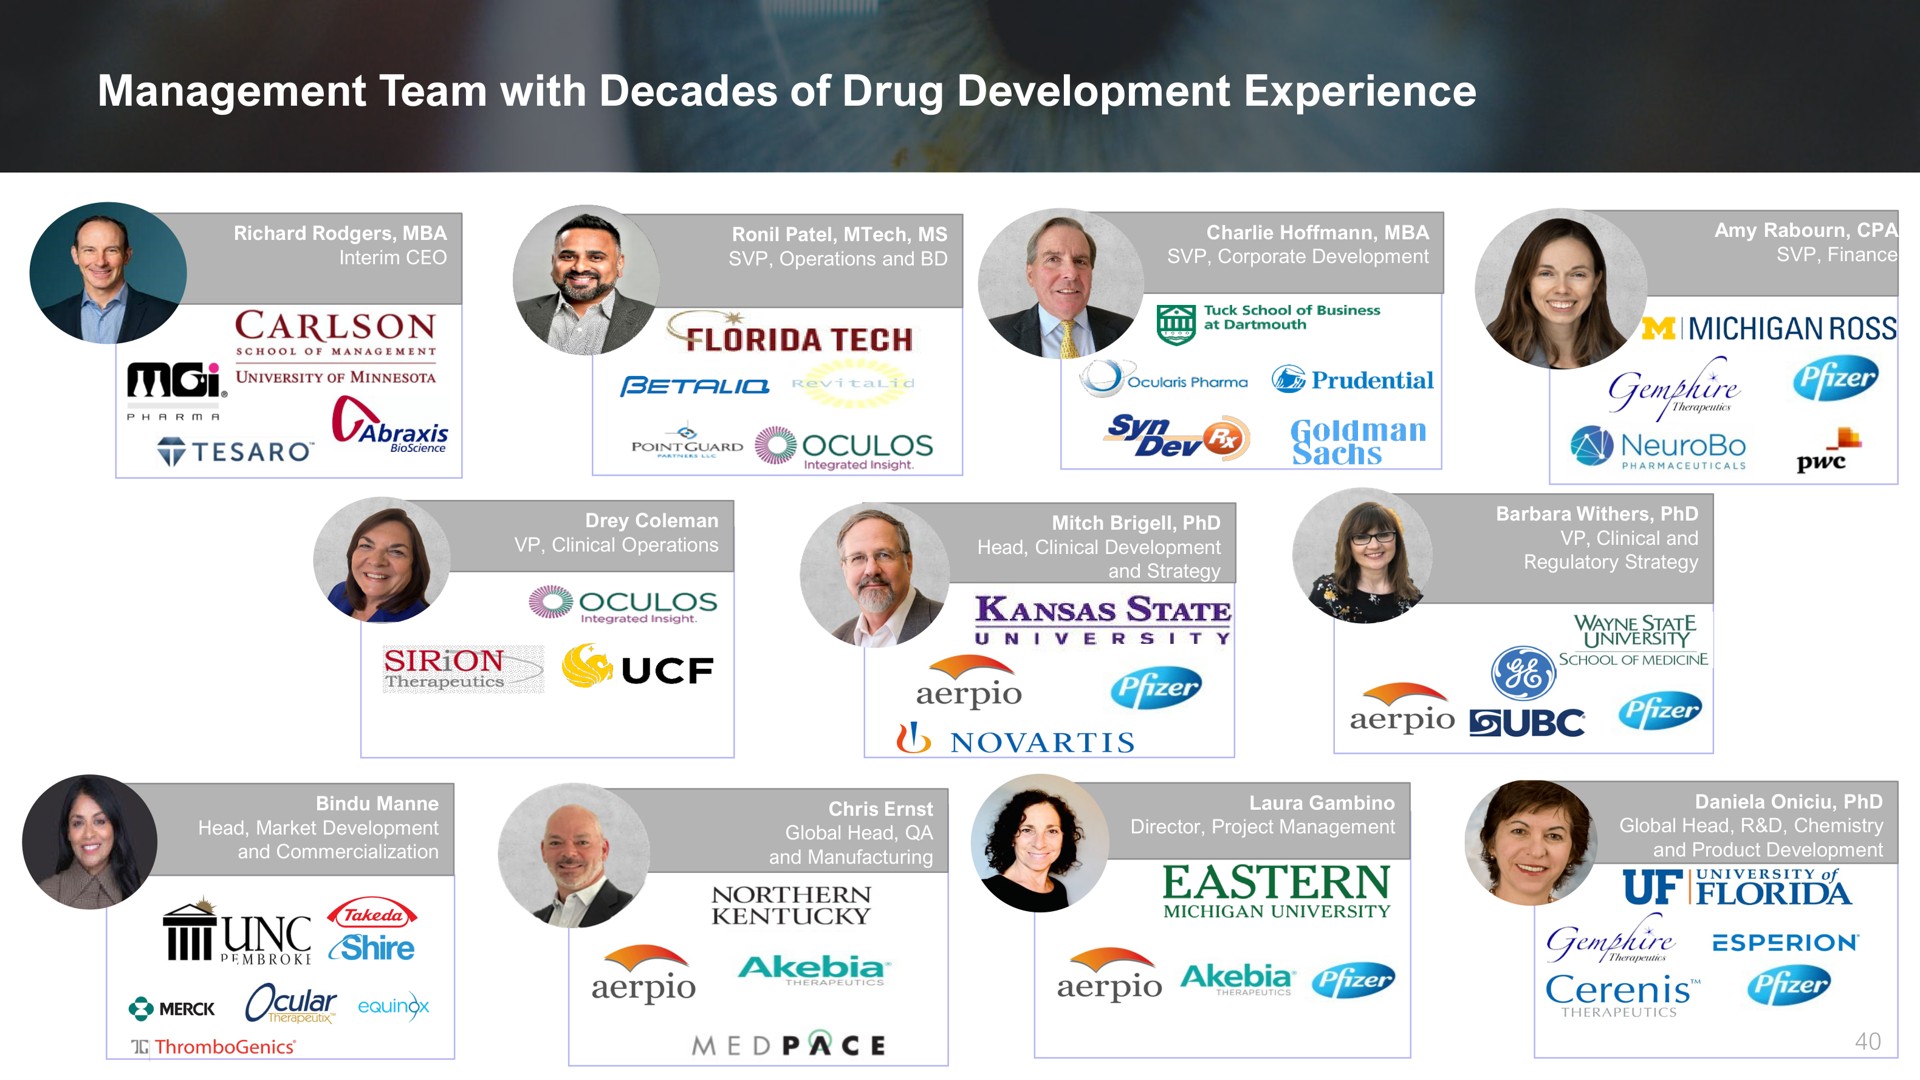 management team with decades of drug development experience one i eastern | Ocuphire Pharma